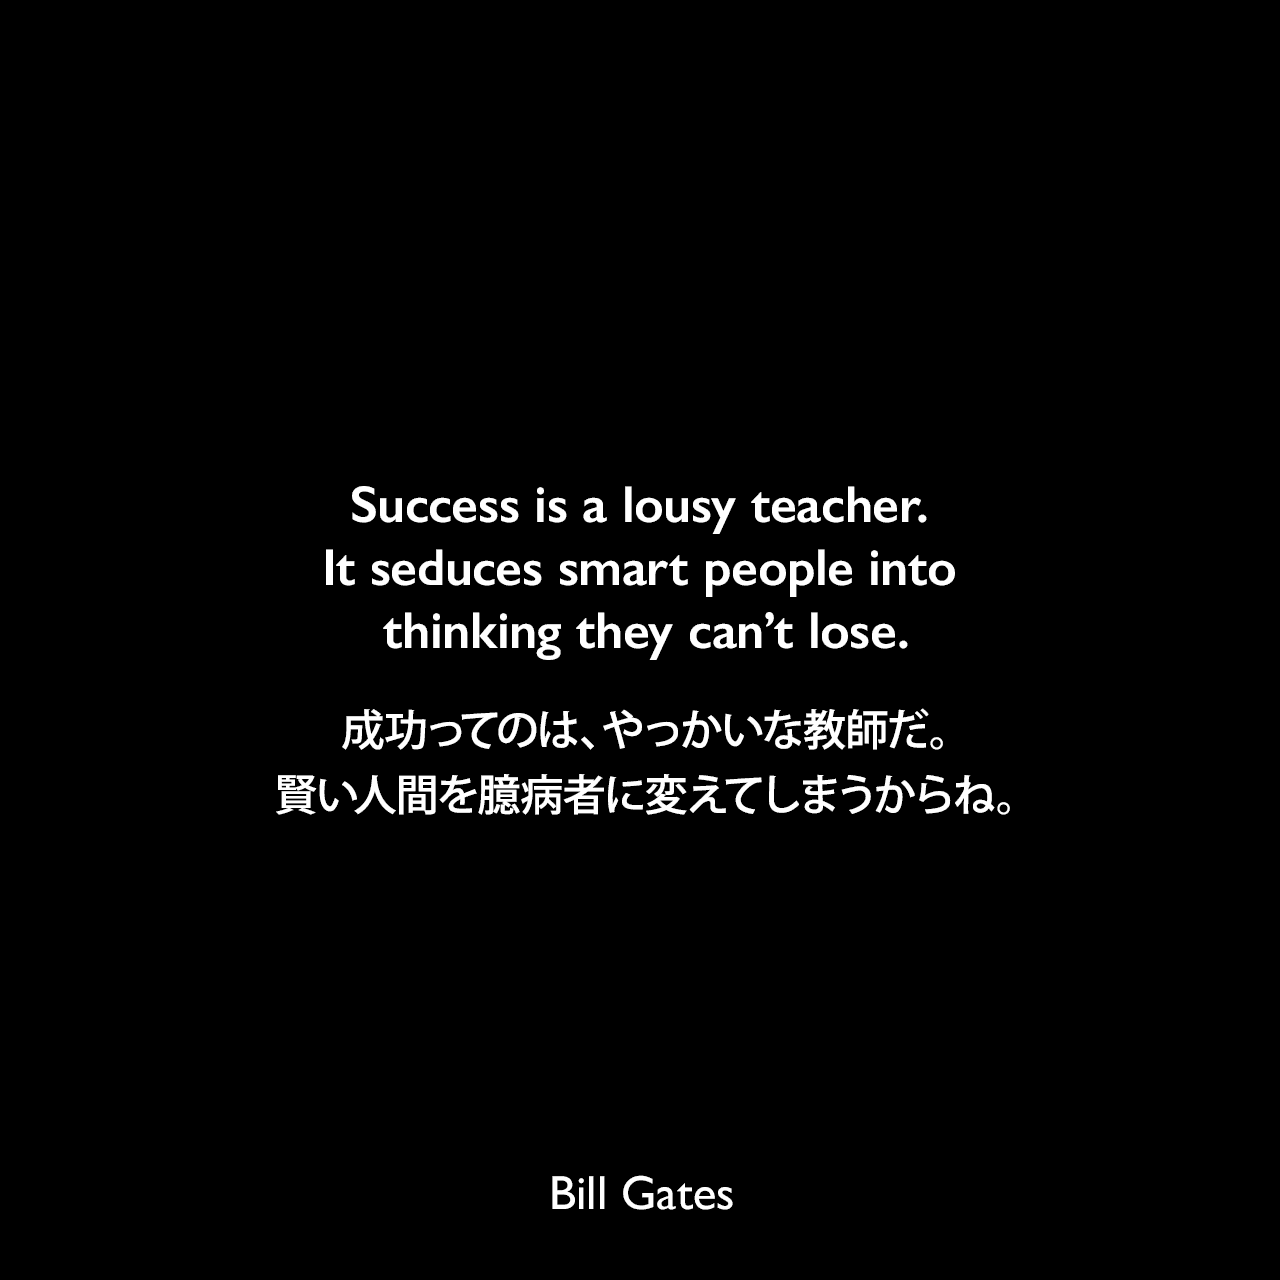 Success is a lousy teacher. It seduces smart people into thinking they can’t lose.成功ってのは、やっかいな教師だ。賢い人間を臆病者に変えてしまうからね。Bill Gates